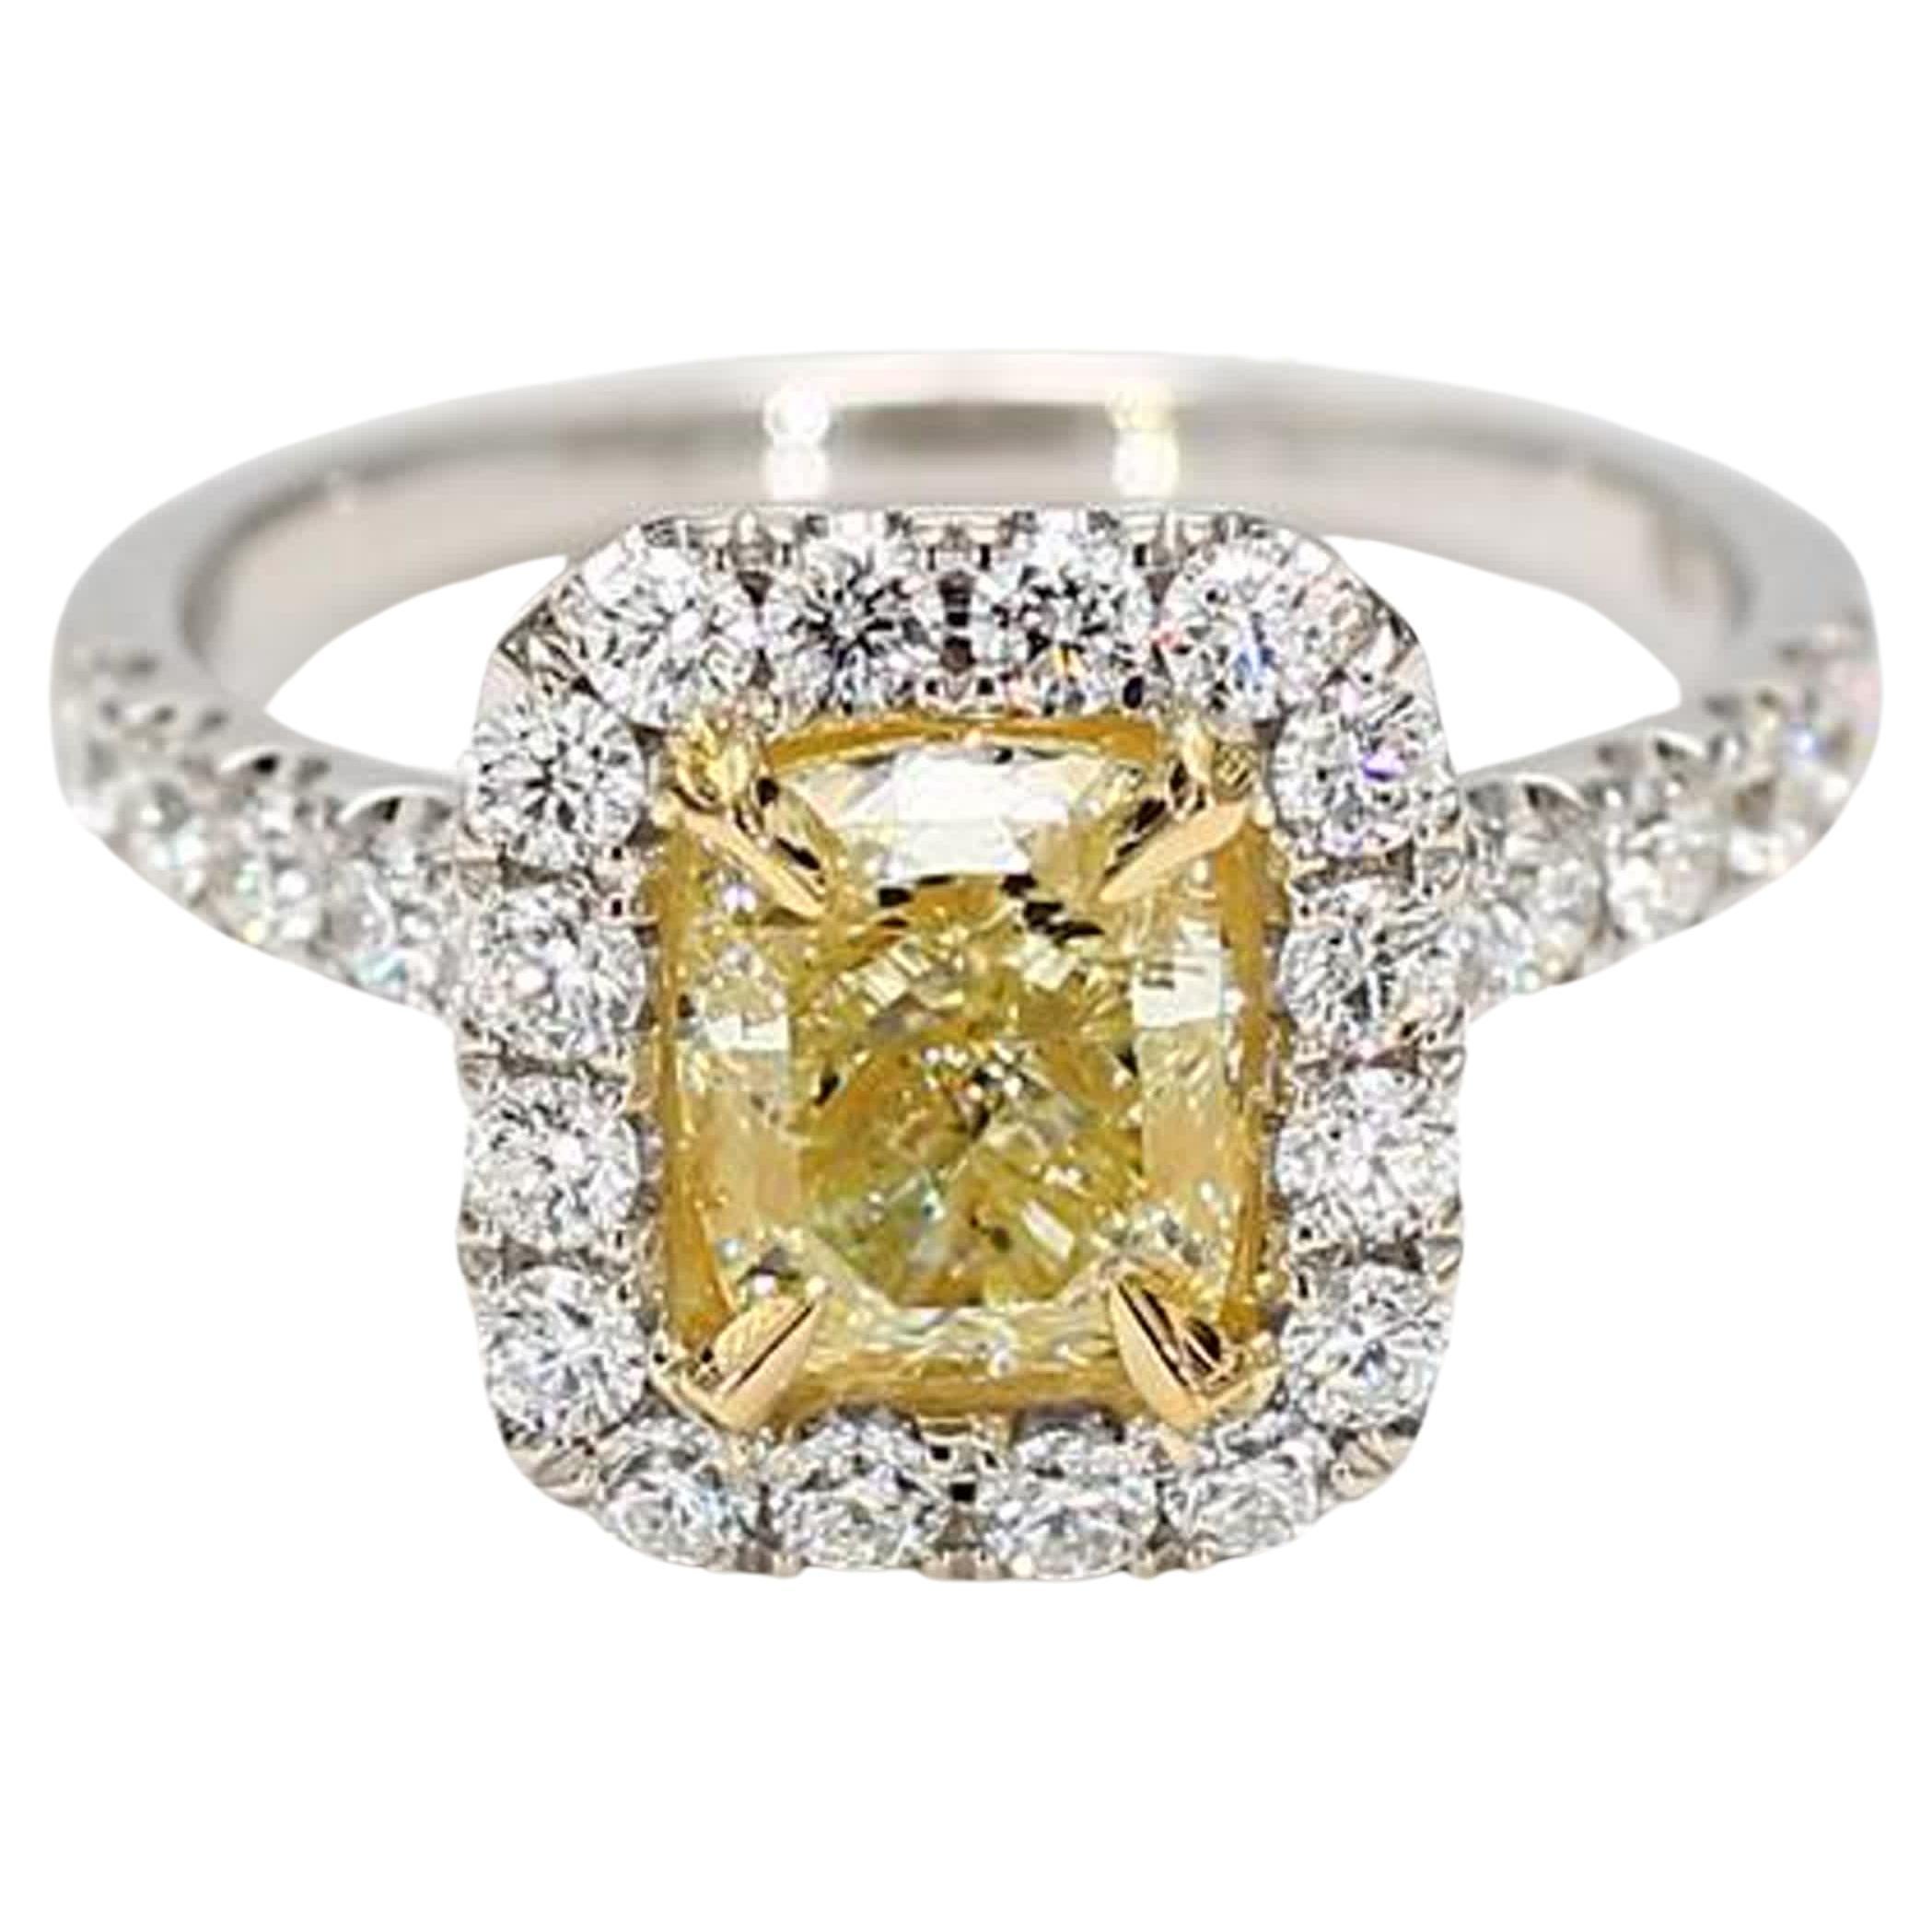 Natural Yellow Cushion and White Diamond 2.42 Carat TW Gold Cocktail Ring